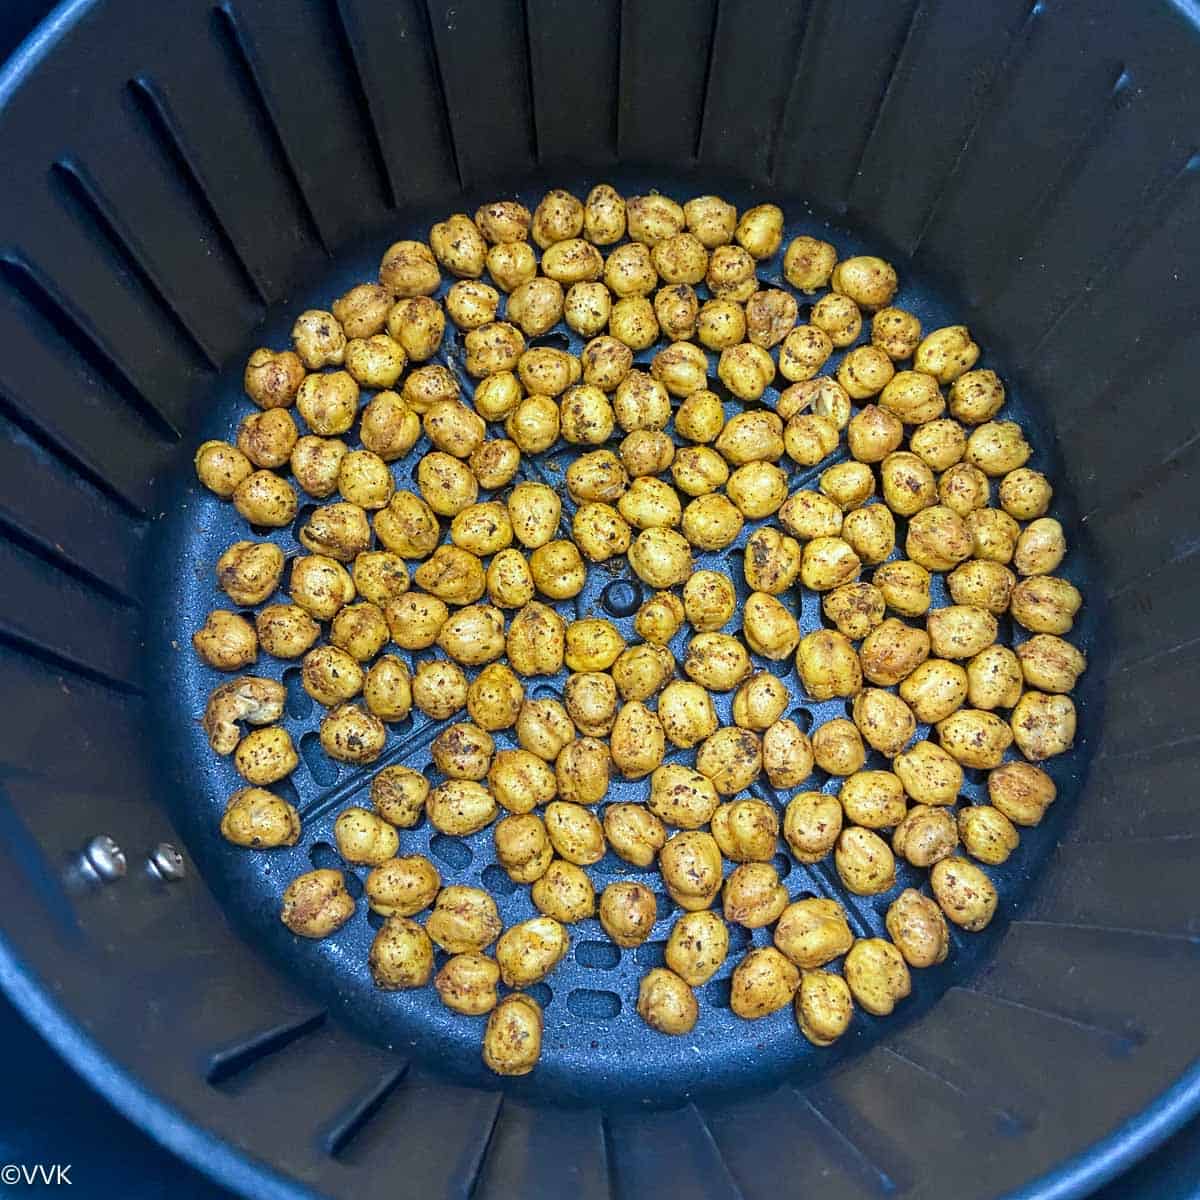 roasted chickpeas after 15 minutes of air frying